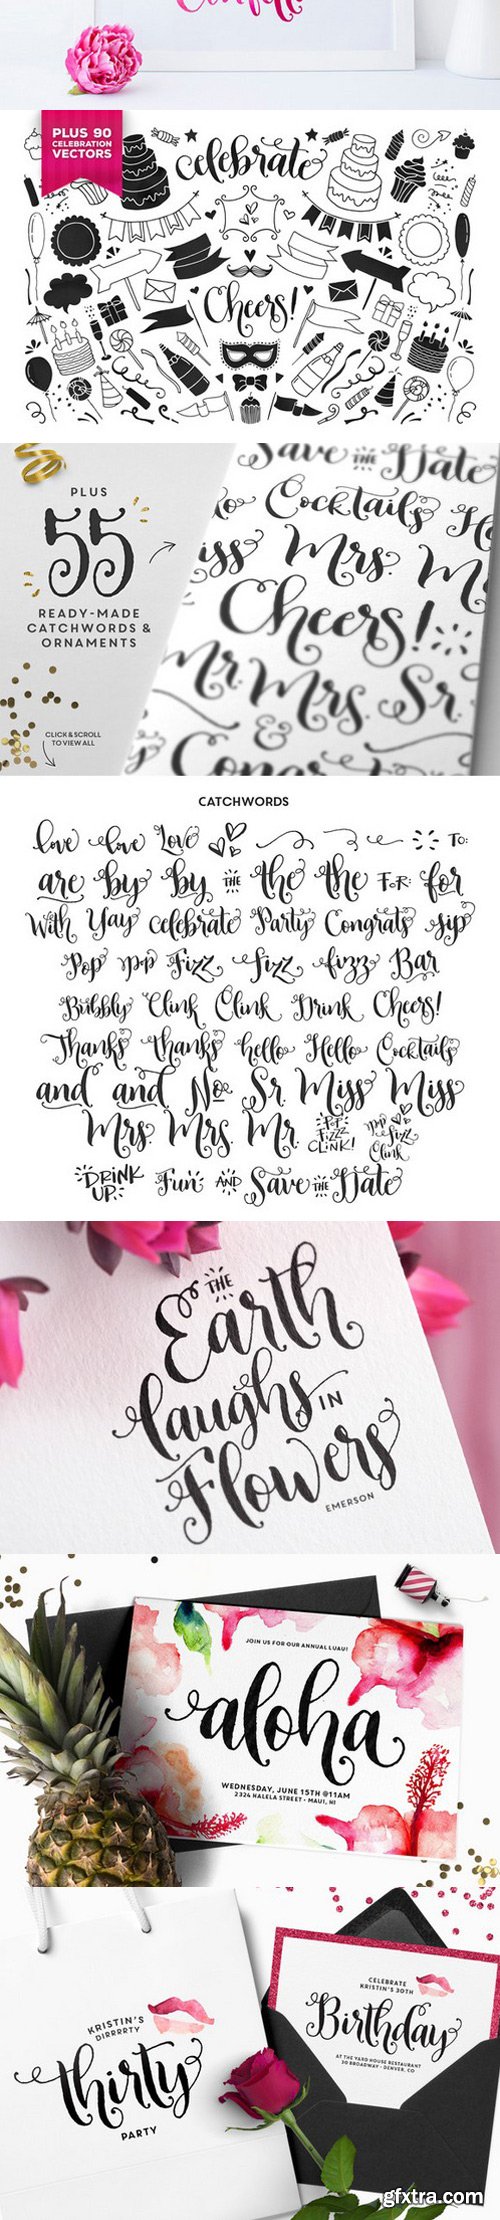 CM - Cheers Font & Graphics Pack 620531